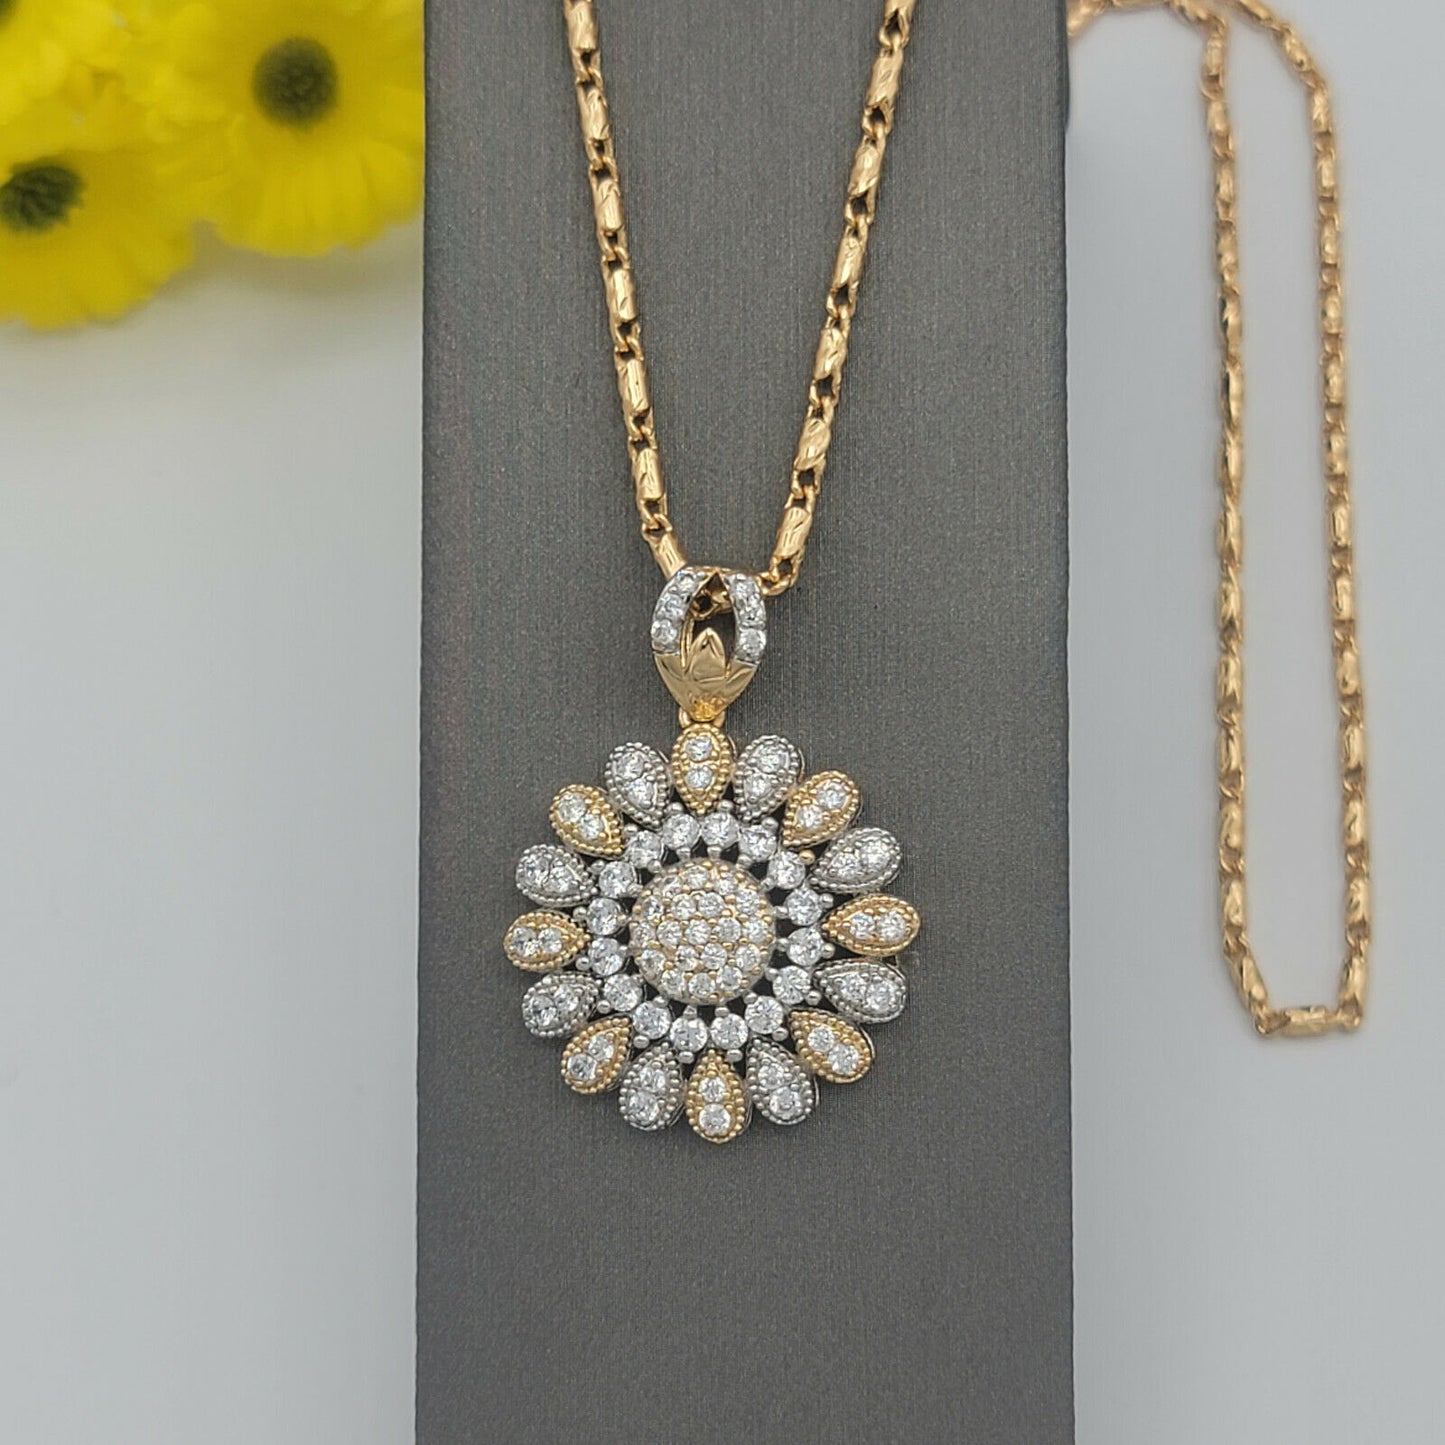 Necklaces - 18K Gold Plated. Clear Crystals Flower Pendant & Chain.